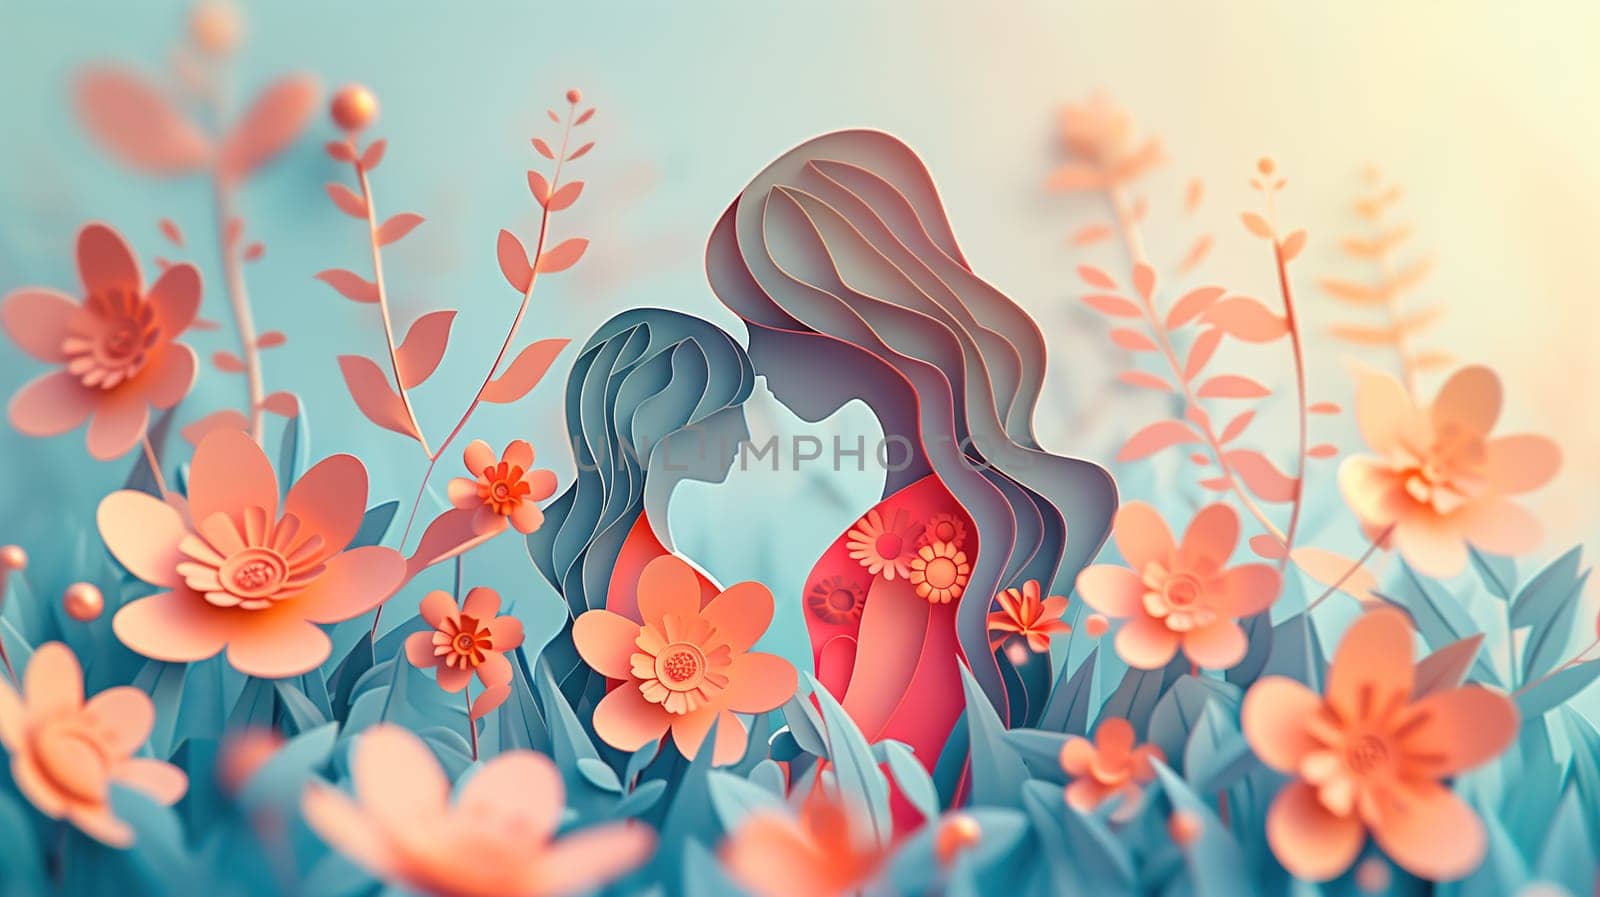 Two women are depicted standing in a vibrant field of colorful flowers. They are surrounded by a variety of blooms, creating a picturesque scene.